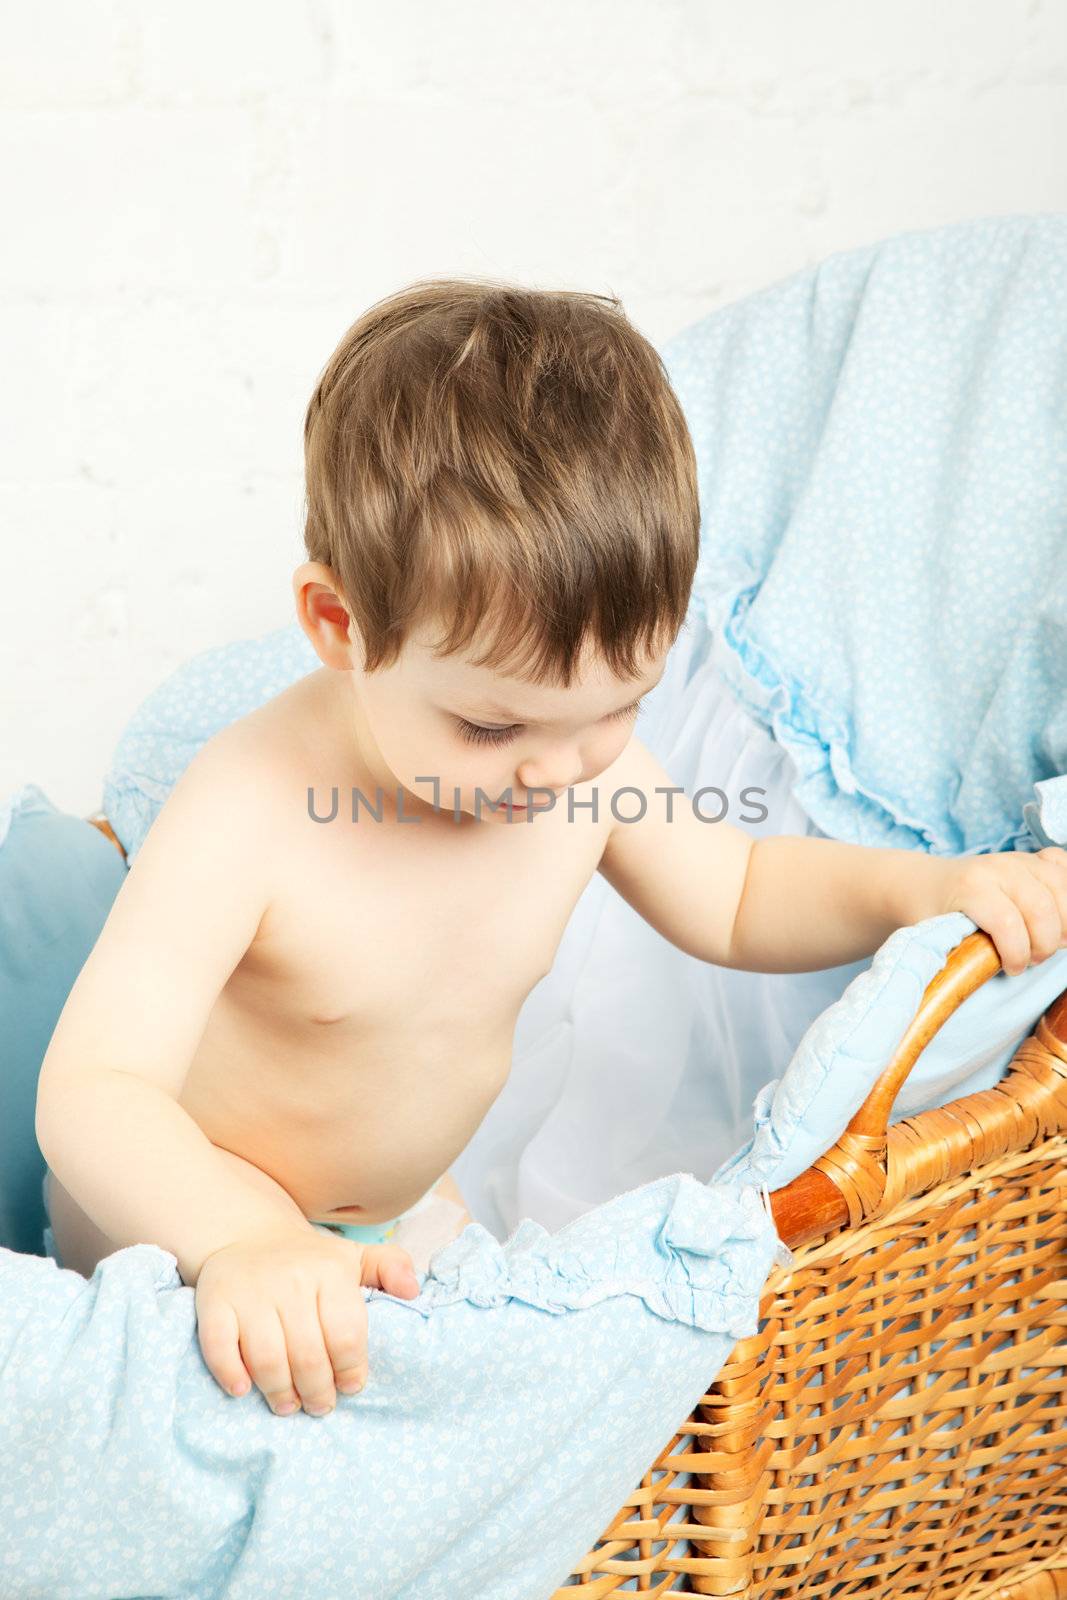 funny boy in cradle, happy and smiling